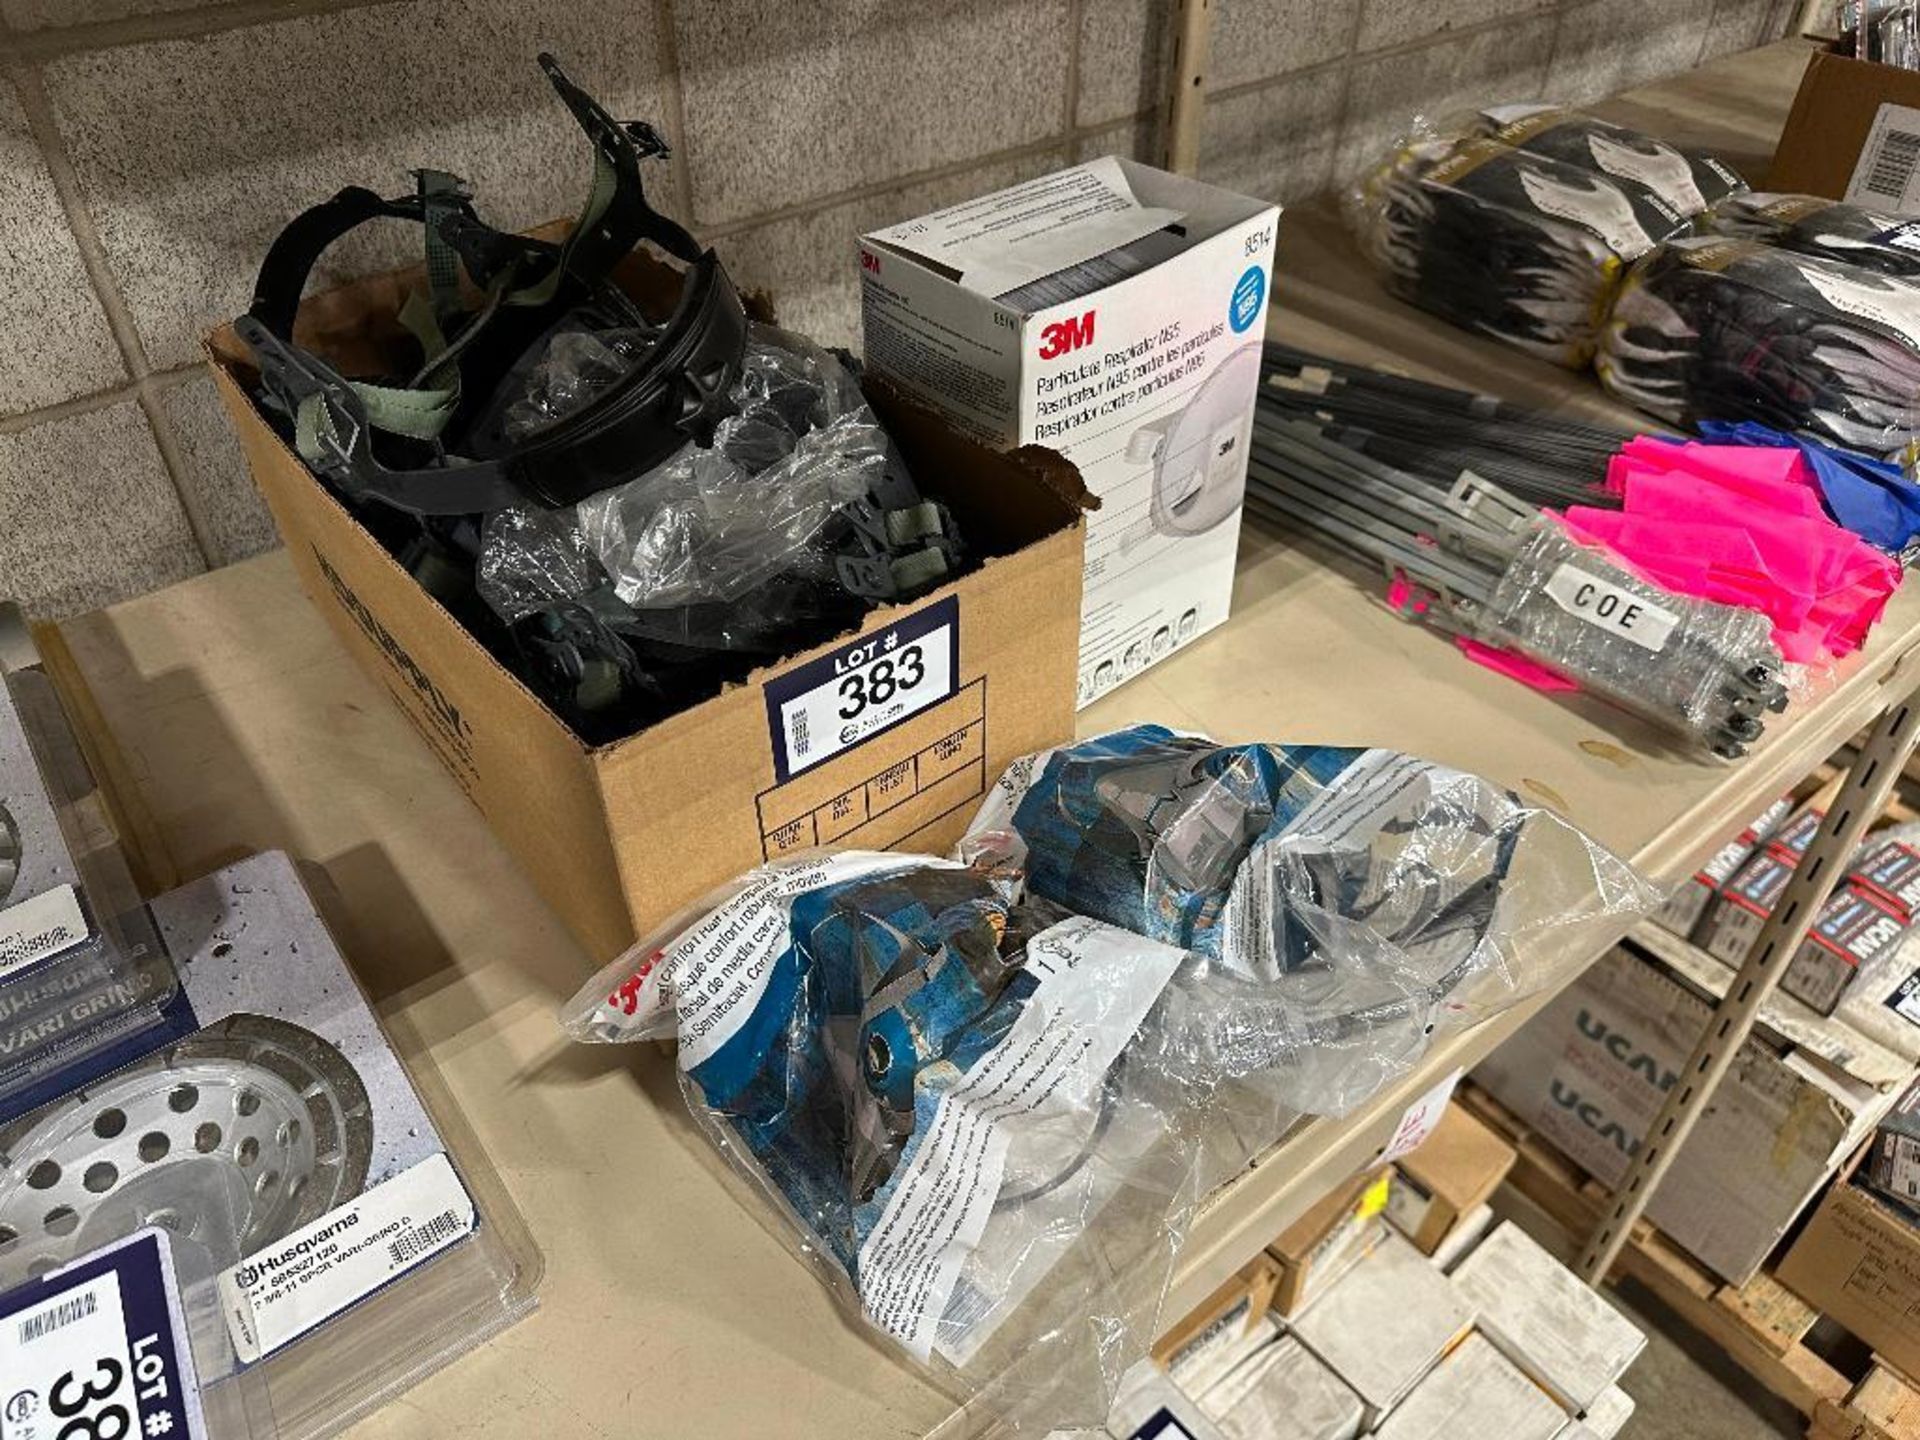 Lot of Asst. N95 Particulate Respirators, (2) 3M Half Masks, Hard Hat Head Supports, etc. - Image 2 of 5